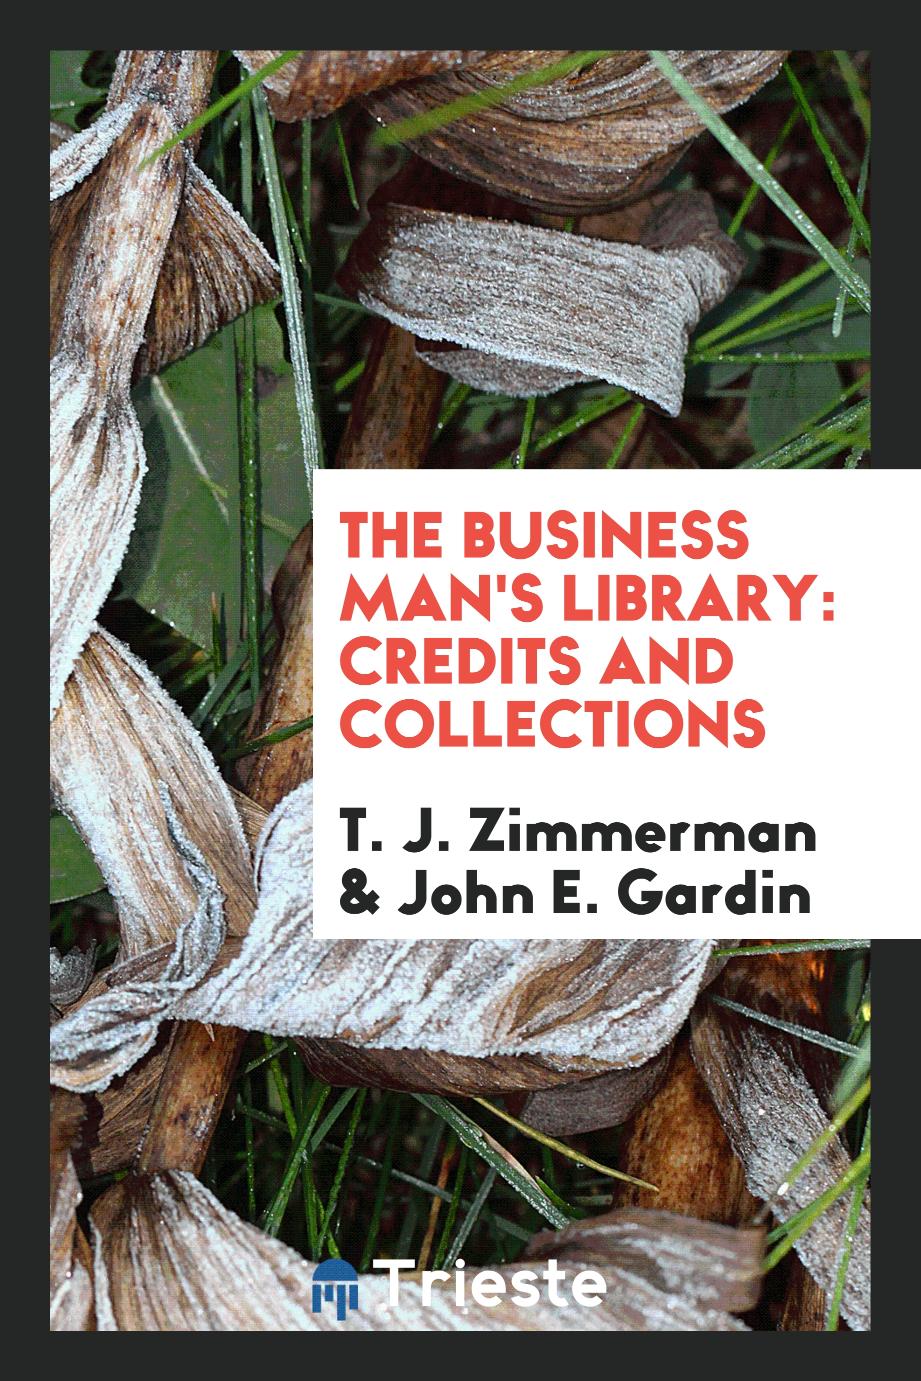 The Business Man's Library: Credits and Collections